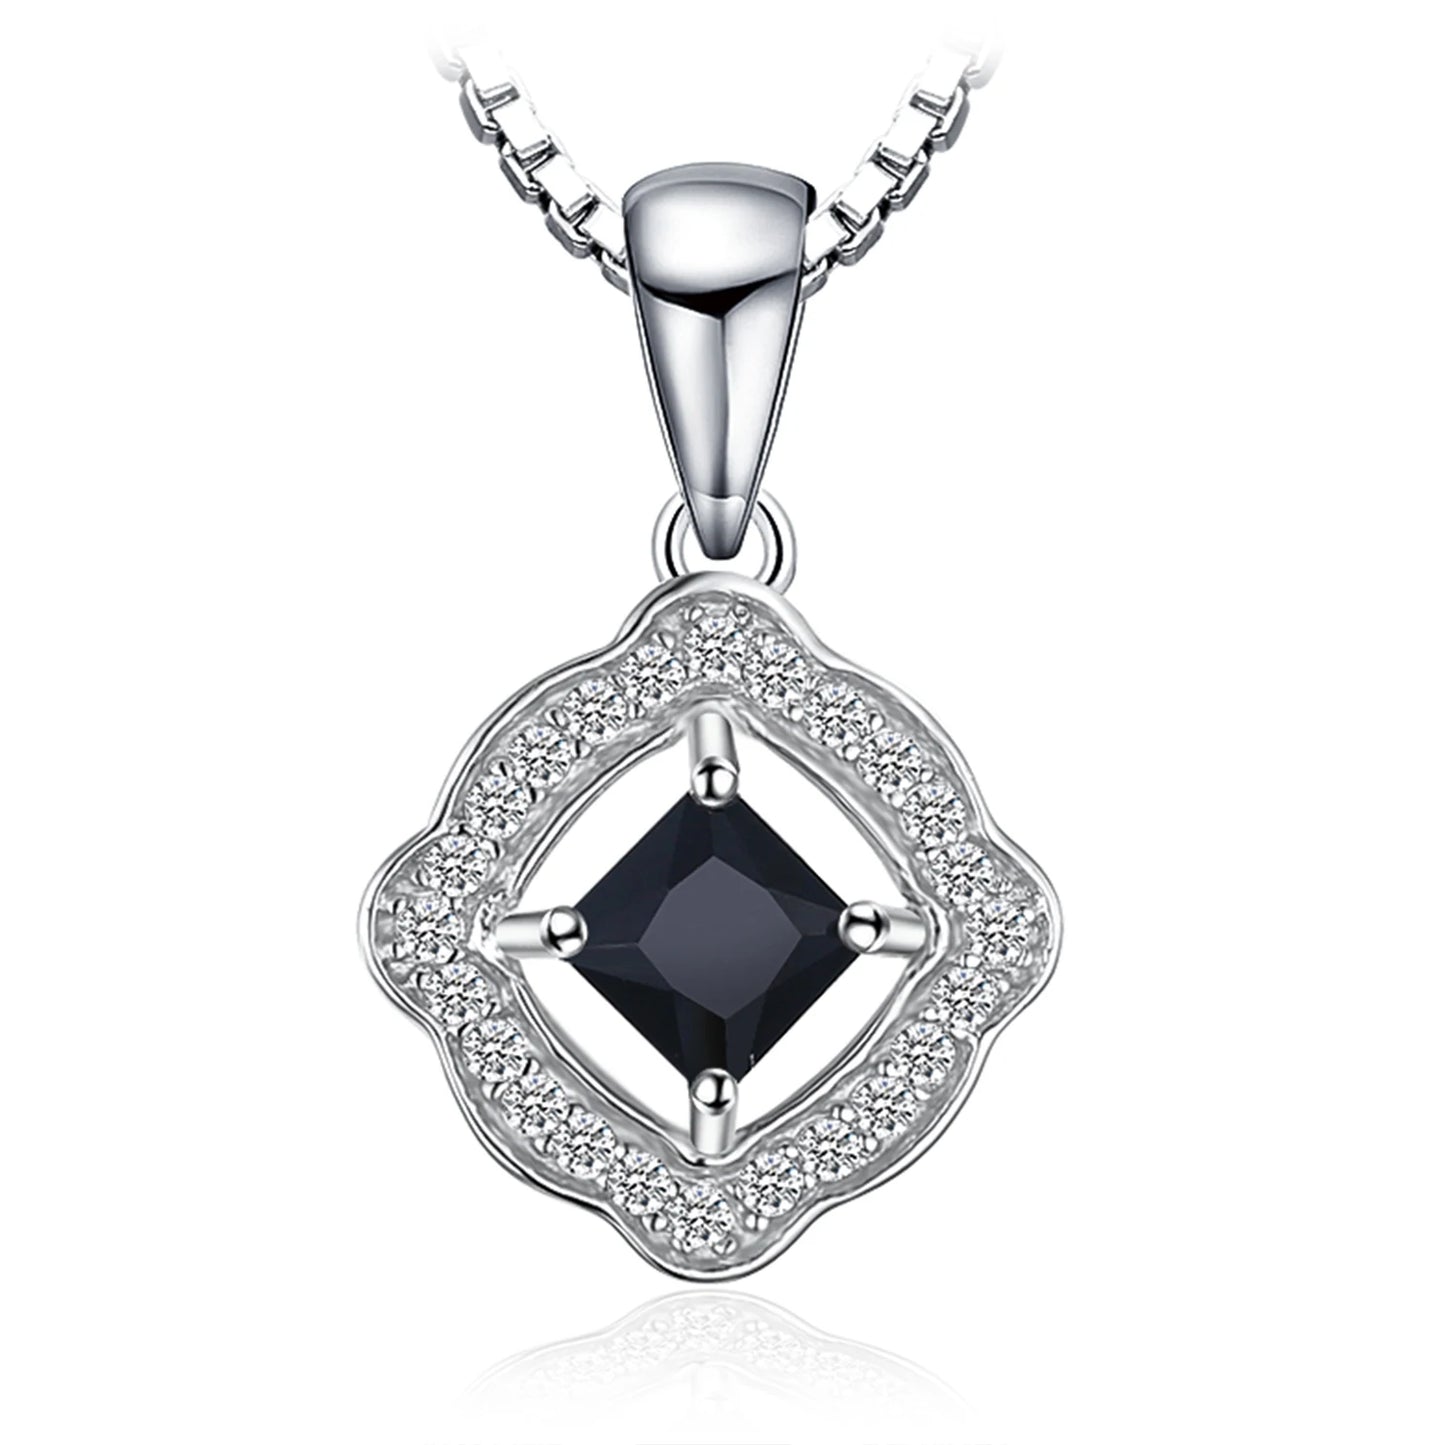 JewelryPalace Natural Black Spinel 925 Sterling Silver Pendant Necklace for Woman Fashion Jewelry No Chain AP223975